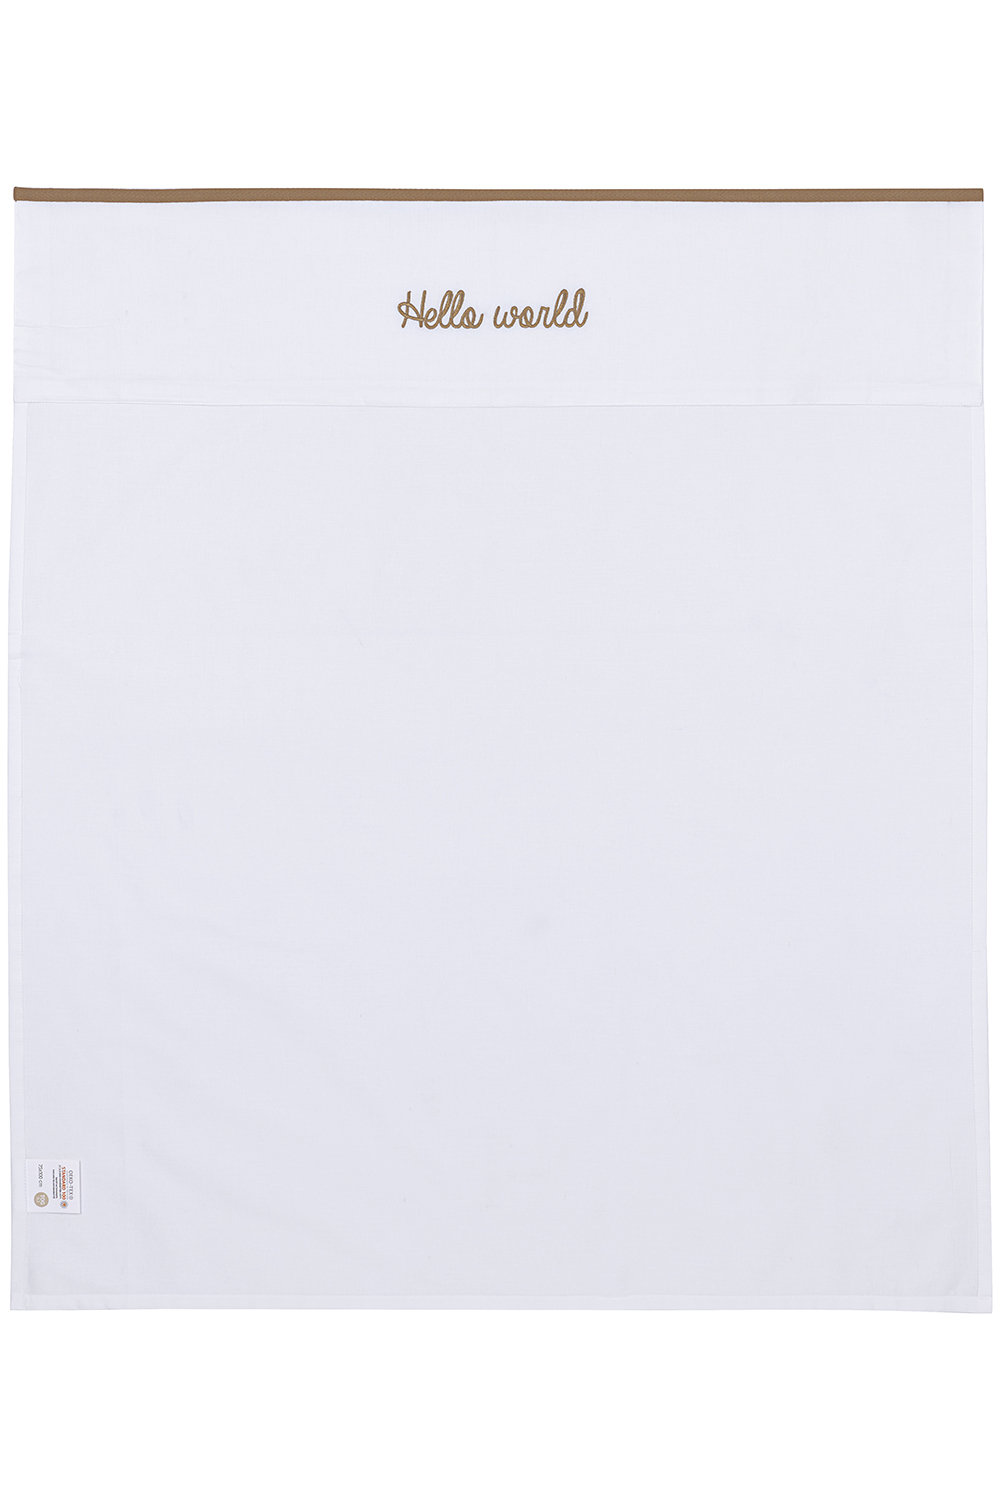 Cot bed sheet Hello World - taupe - 100x150cm